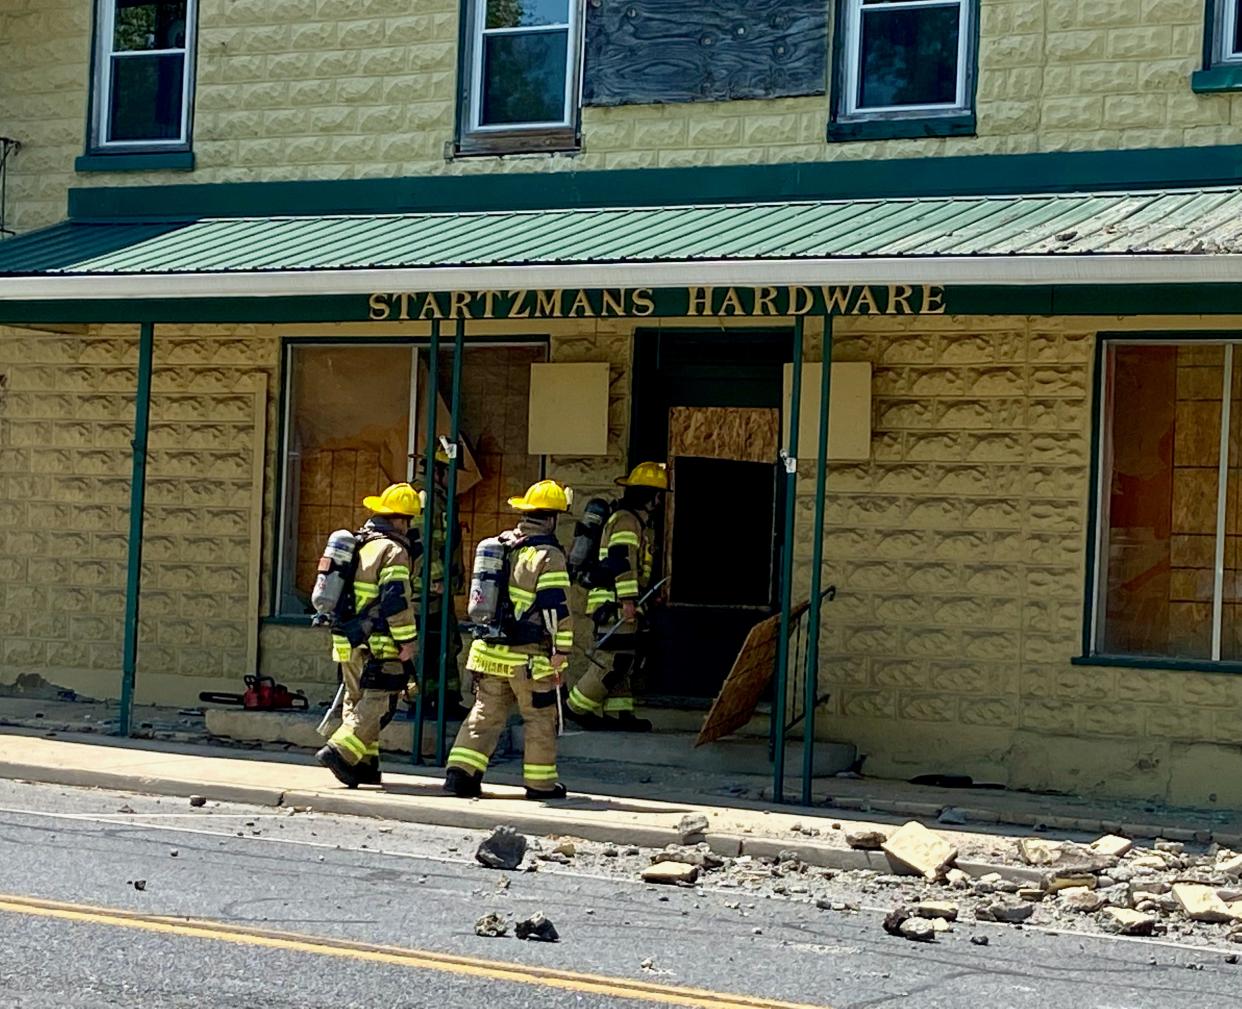 Hagerstown firefighters check out the former Startzman's Hardware store in the 700 block of South Potomac Street after part of the facade collapsed Sunday onto the street and sidewalk.